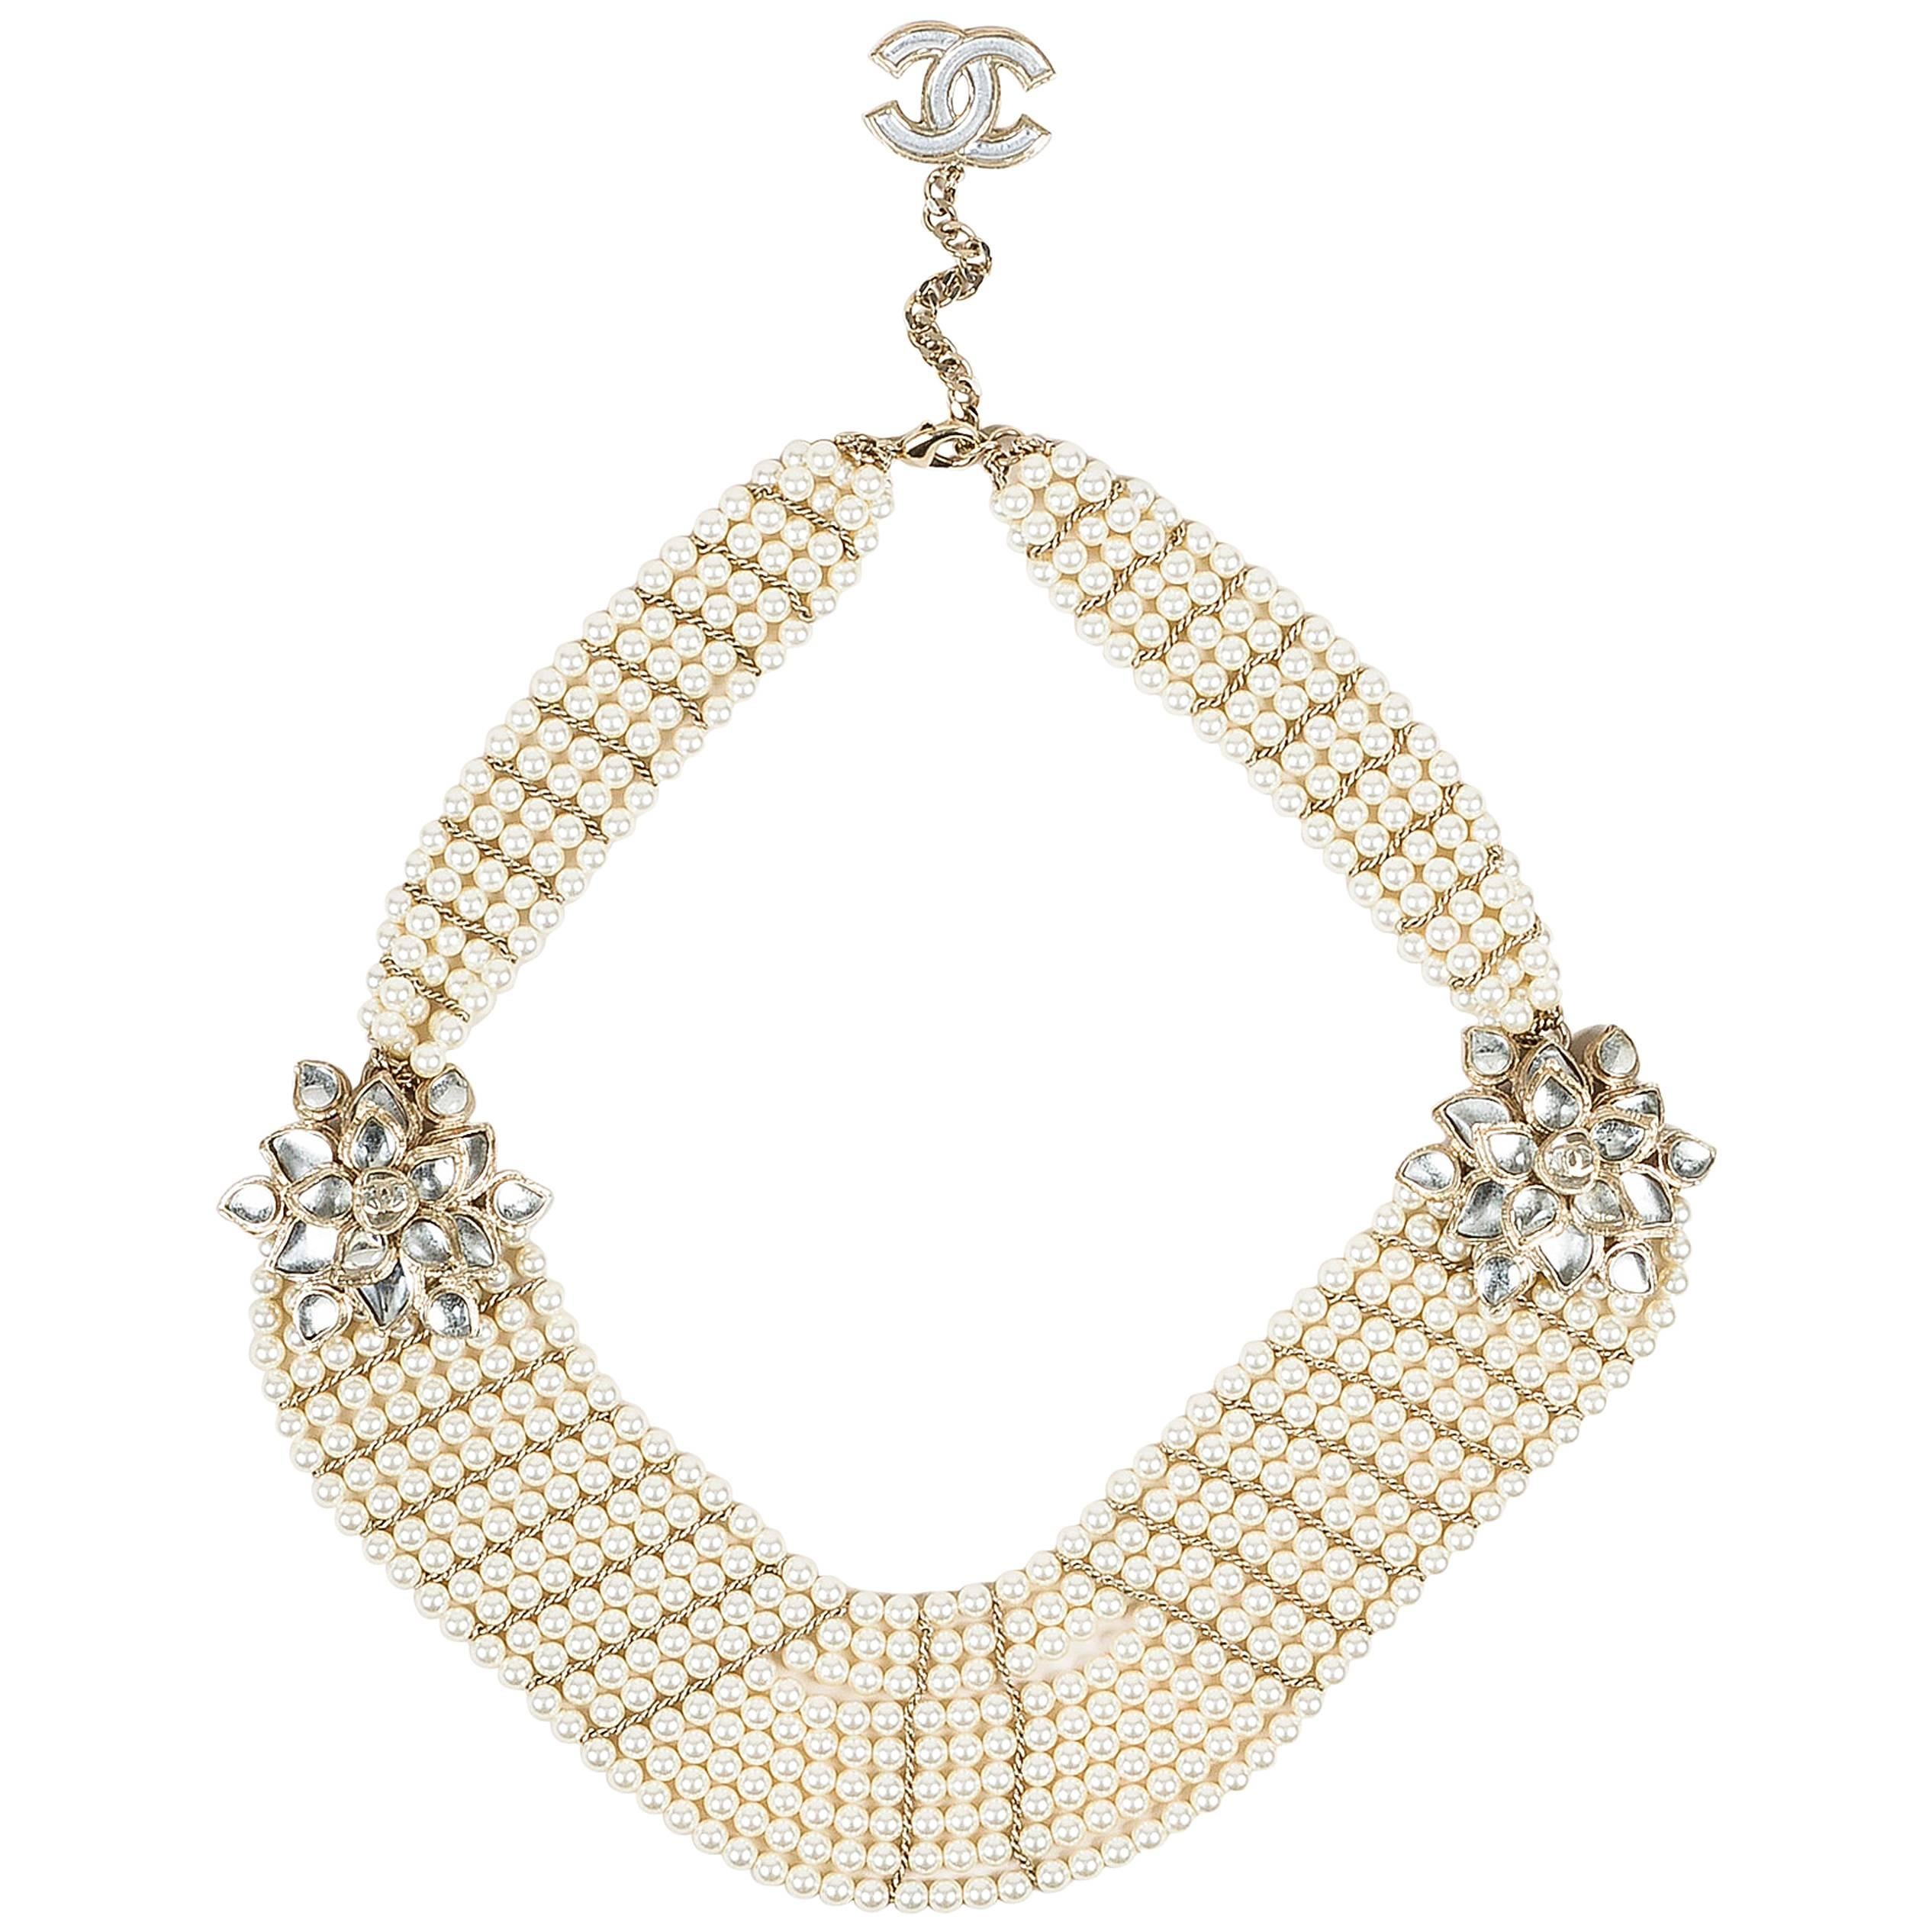 Chanel 12A Gold Tone Faux Pearl Glass Stone 'CC' Flower Pedant Bib Necklace For Sale